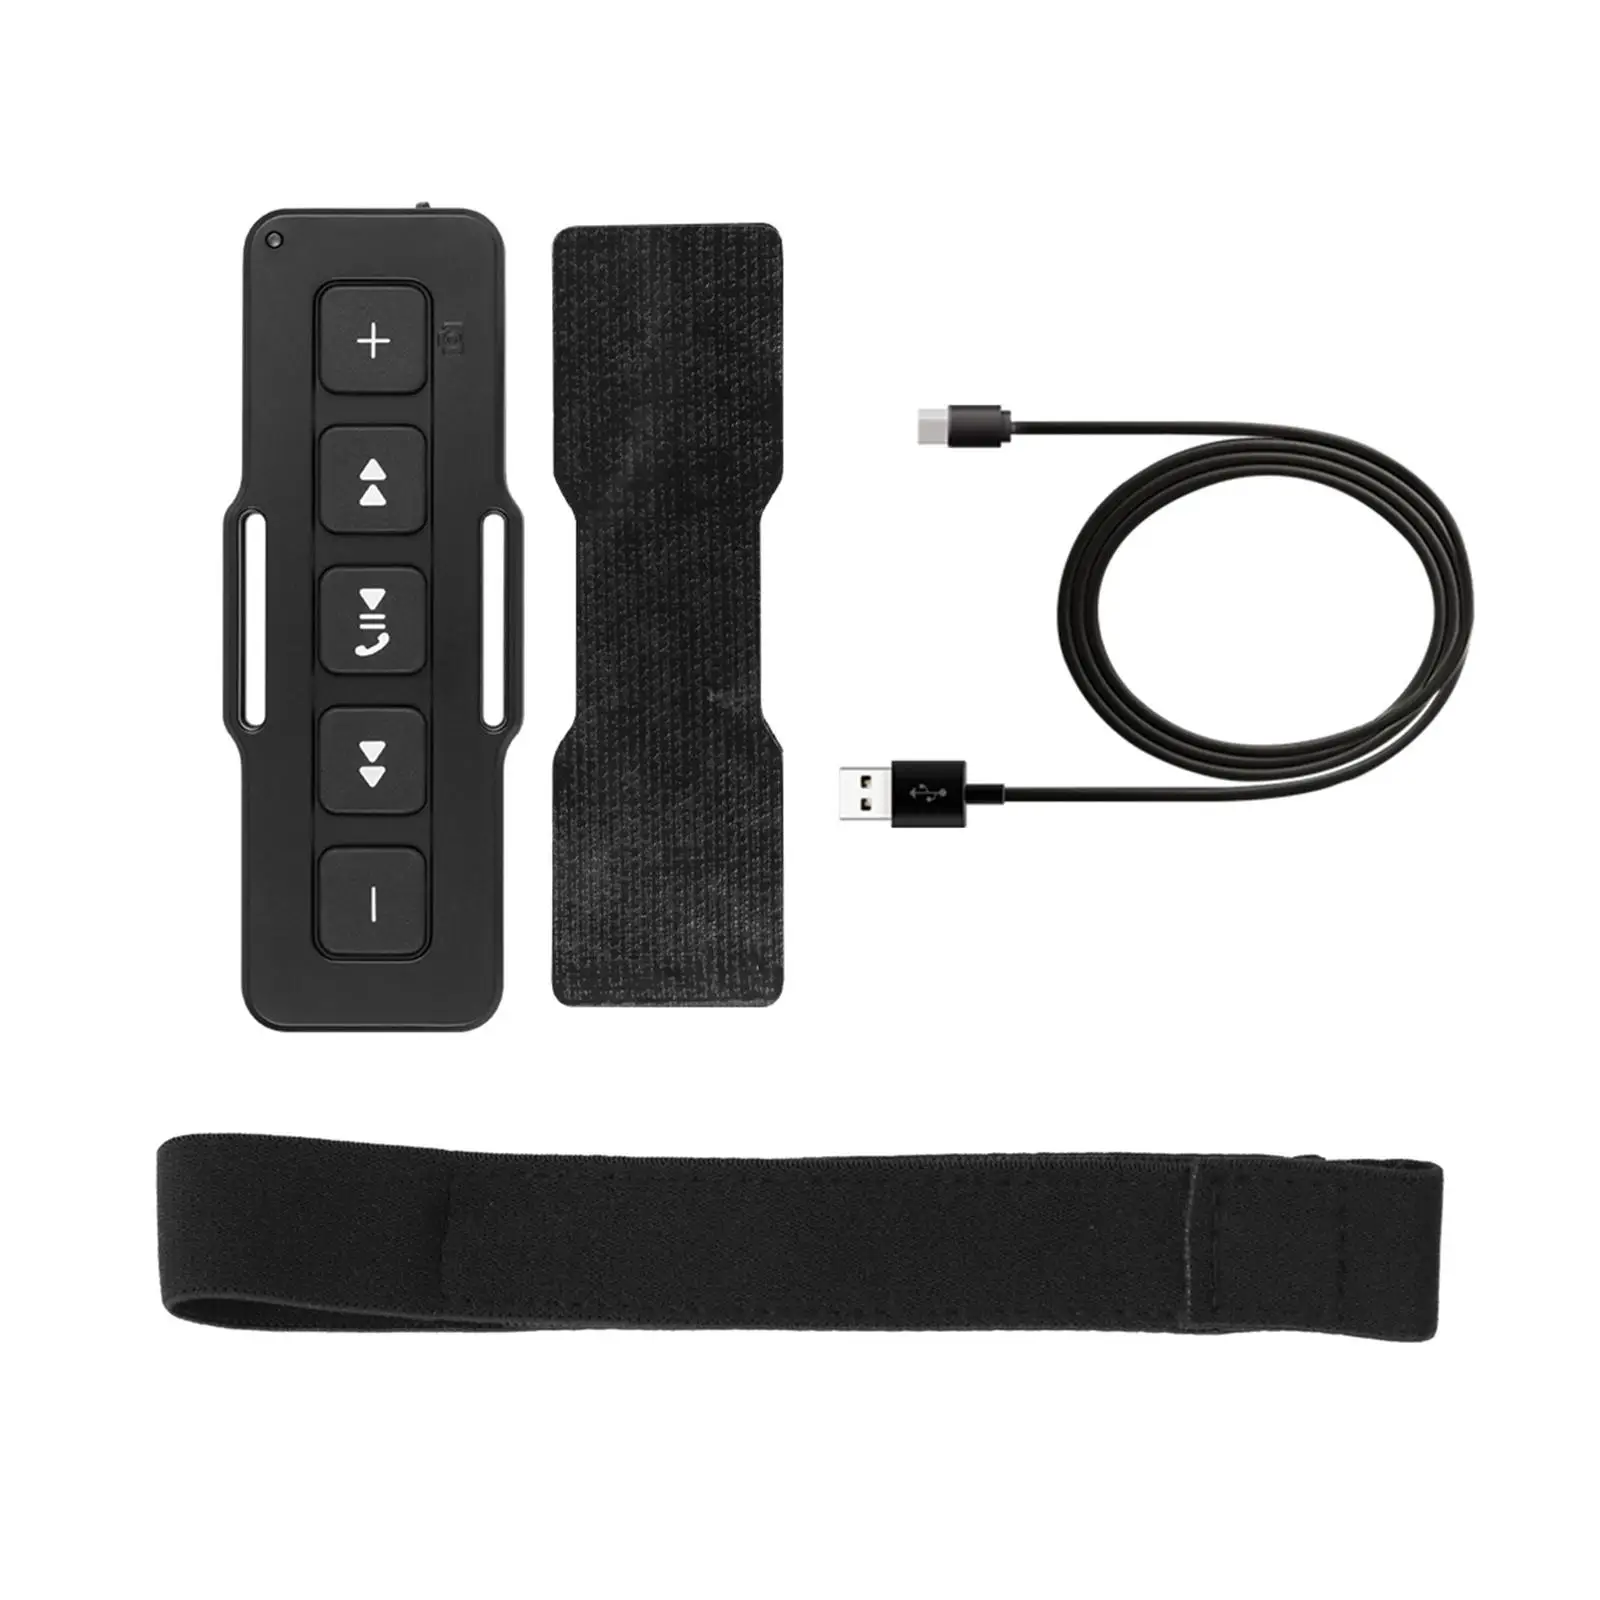 Motorcycle Remote Controller IPX4 Bike Handlebar Media Control for Car